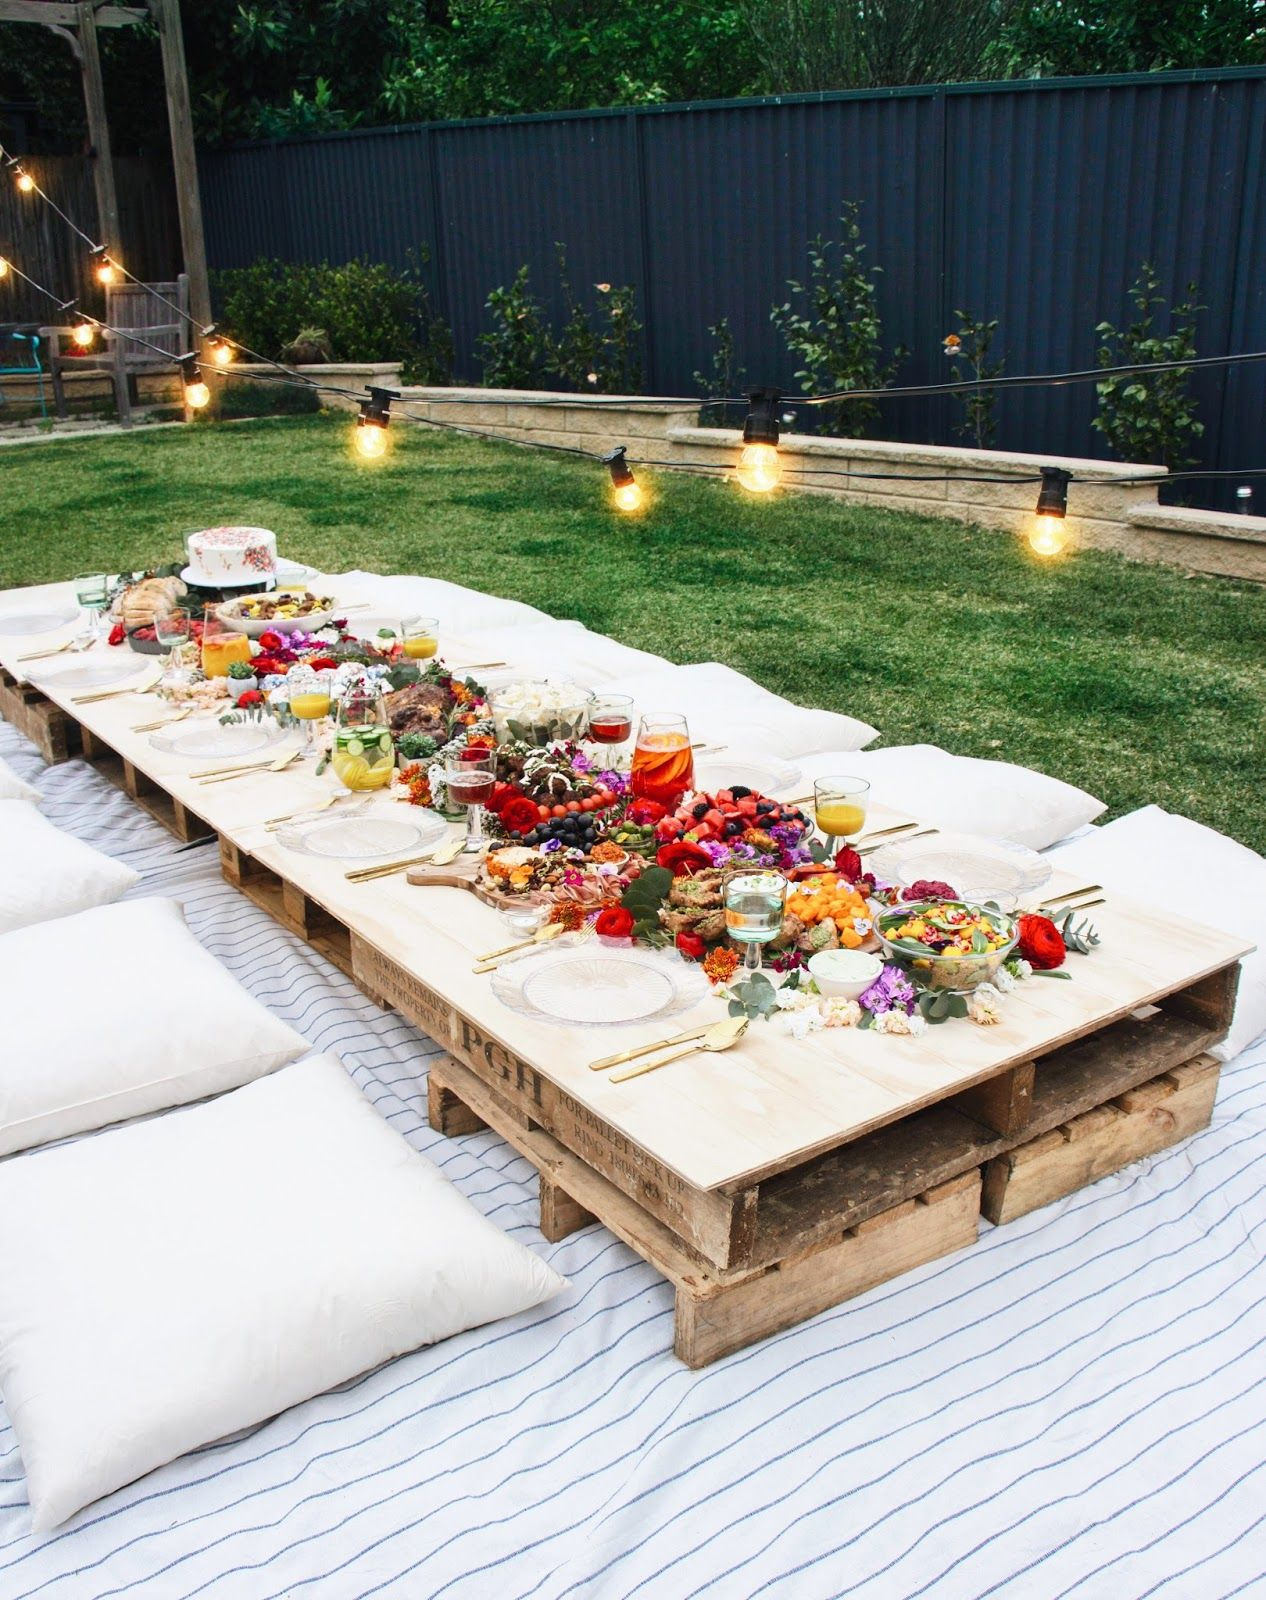 18.SIMPHOME.COM Must see backyard party ideas for a relaxing and luxurious meeting